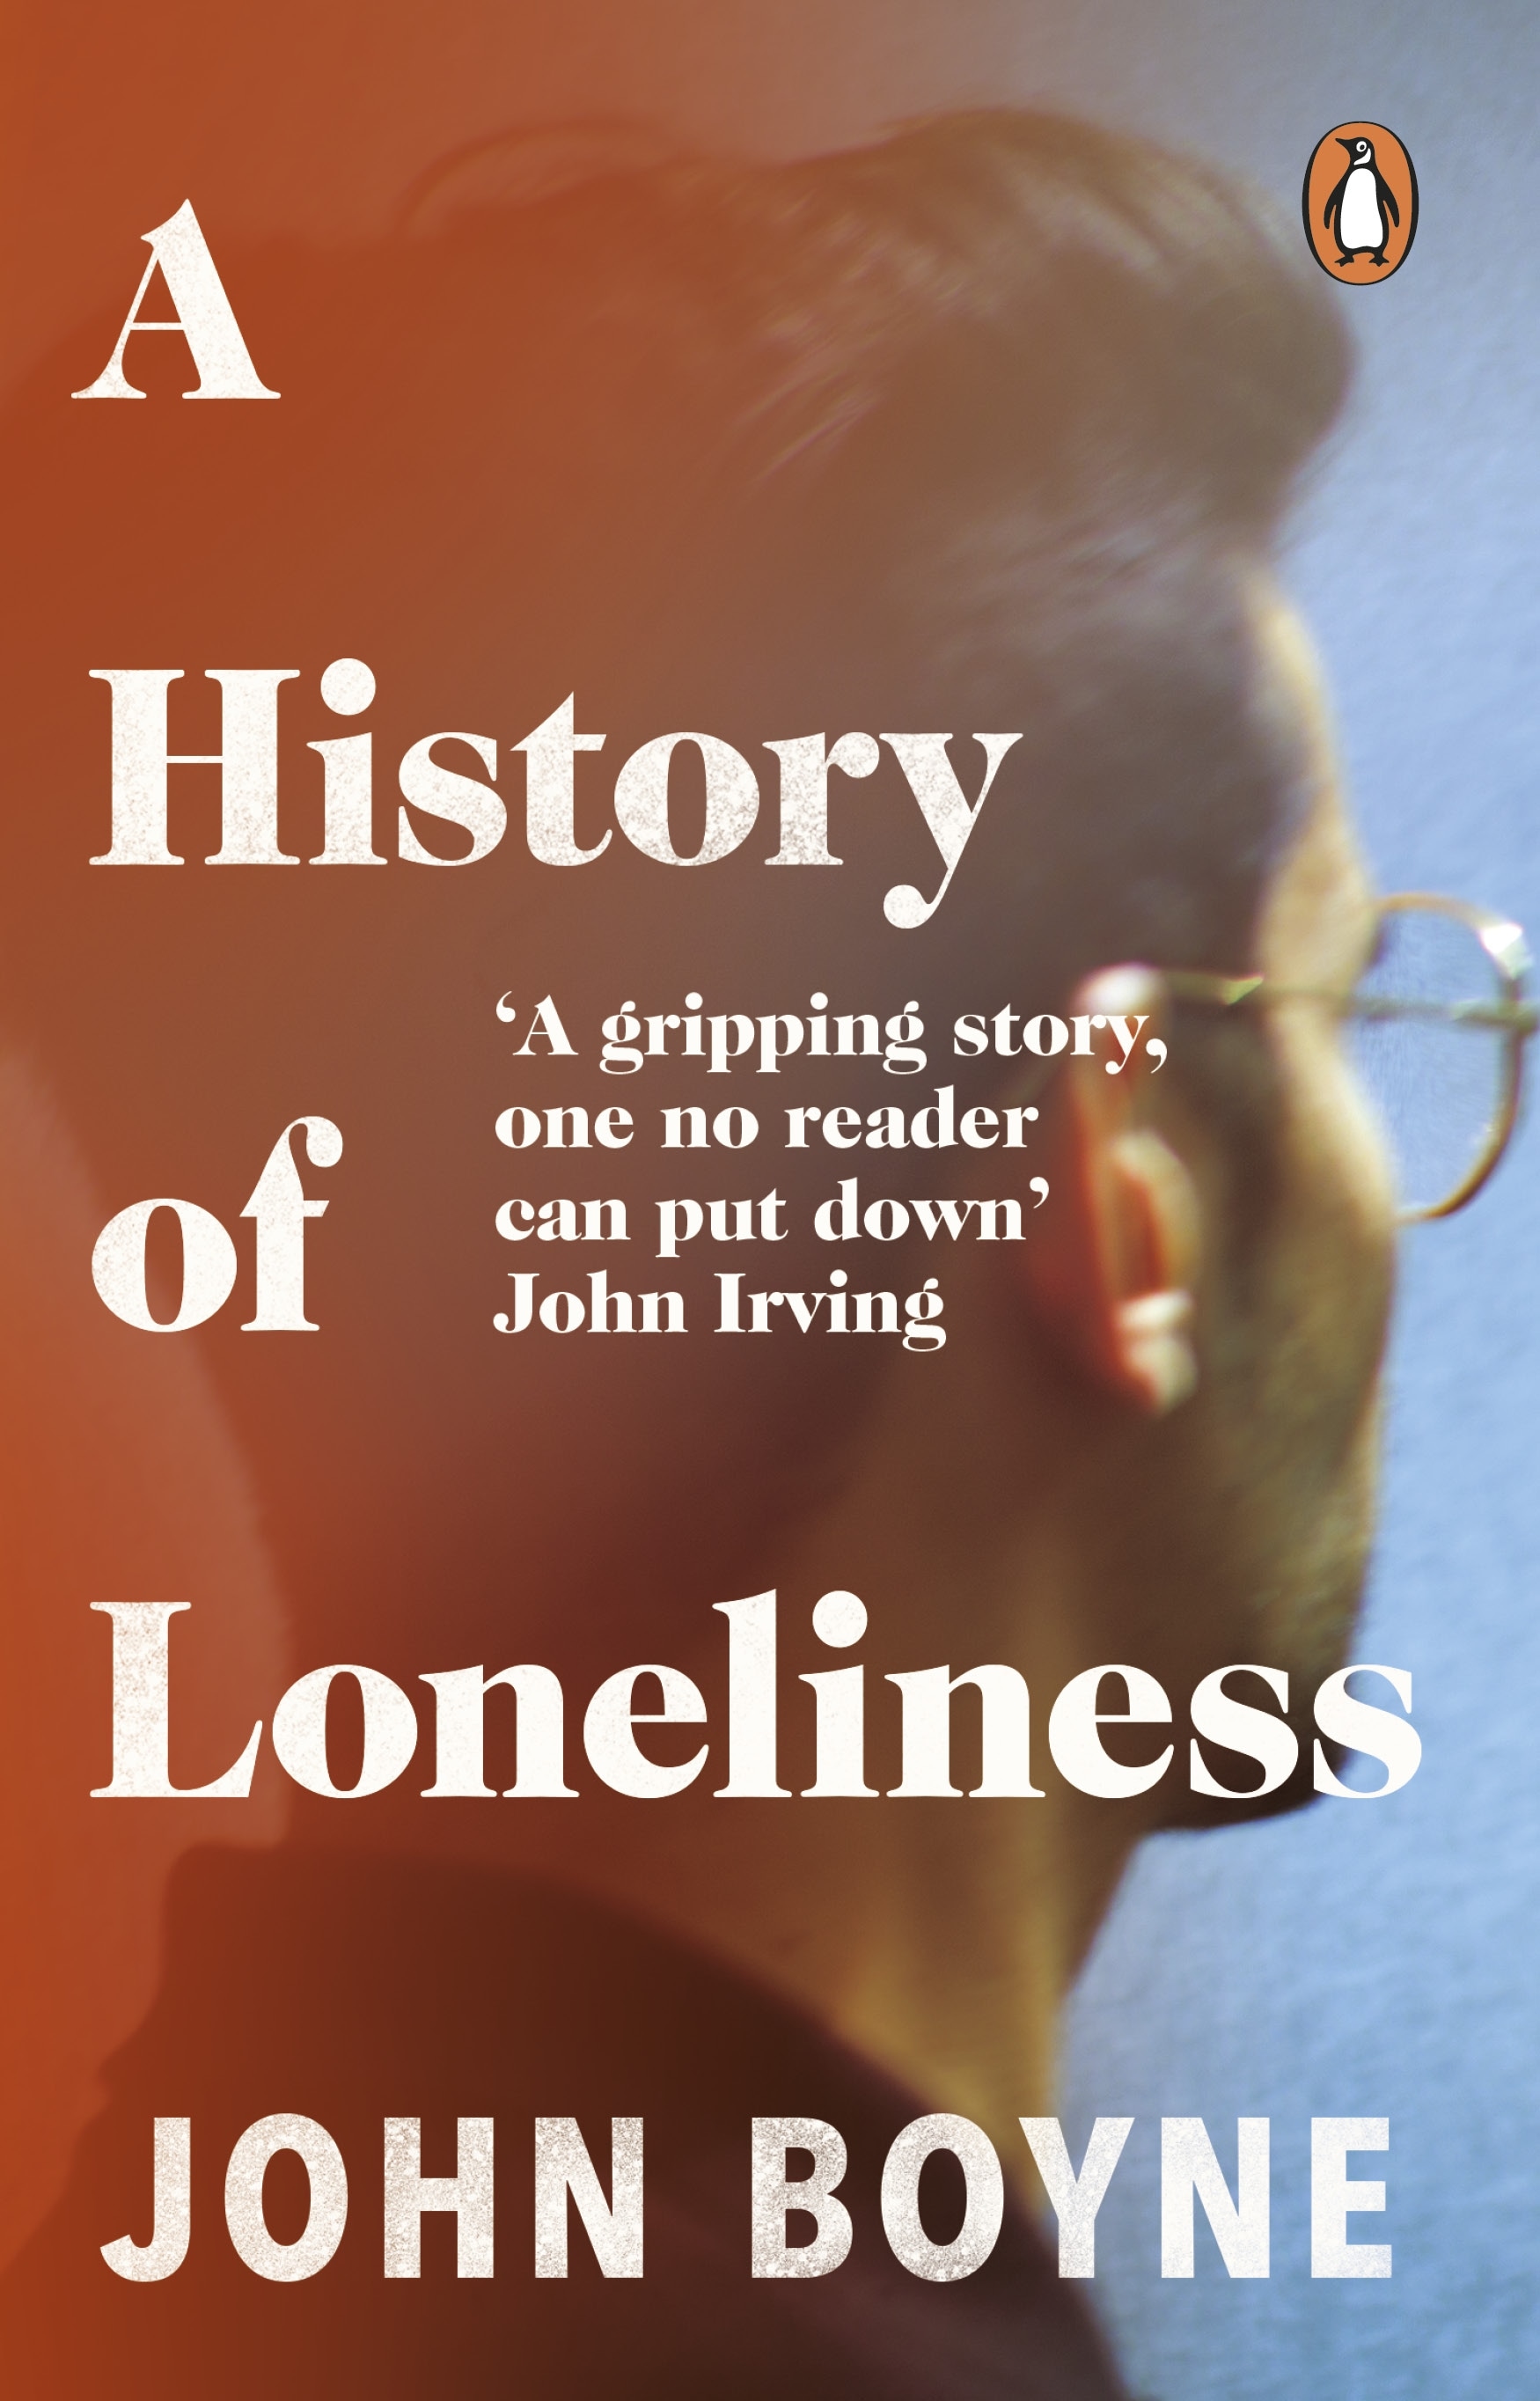 Book “A History of Loneliness” by John Boyne — May 7, 2015